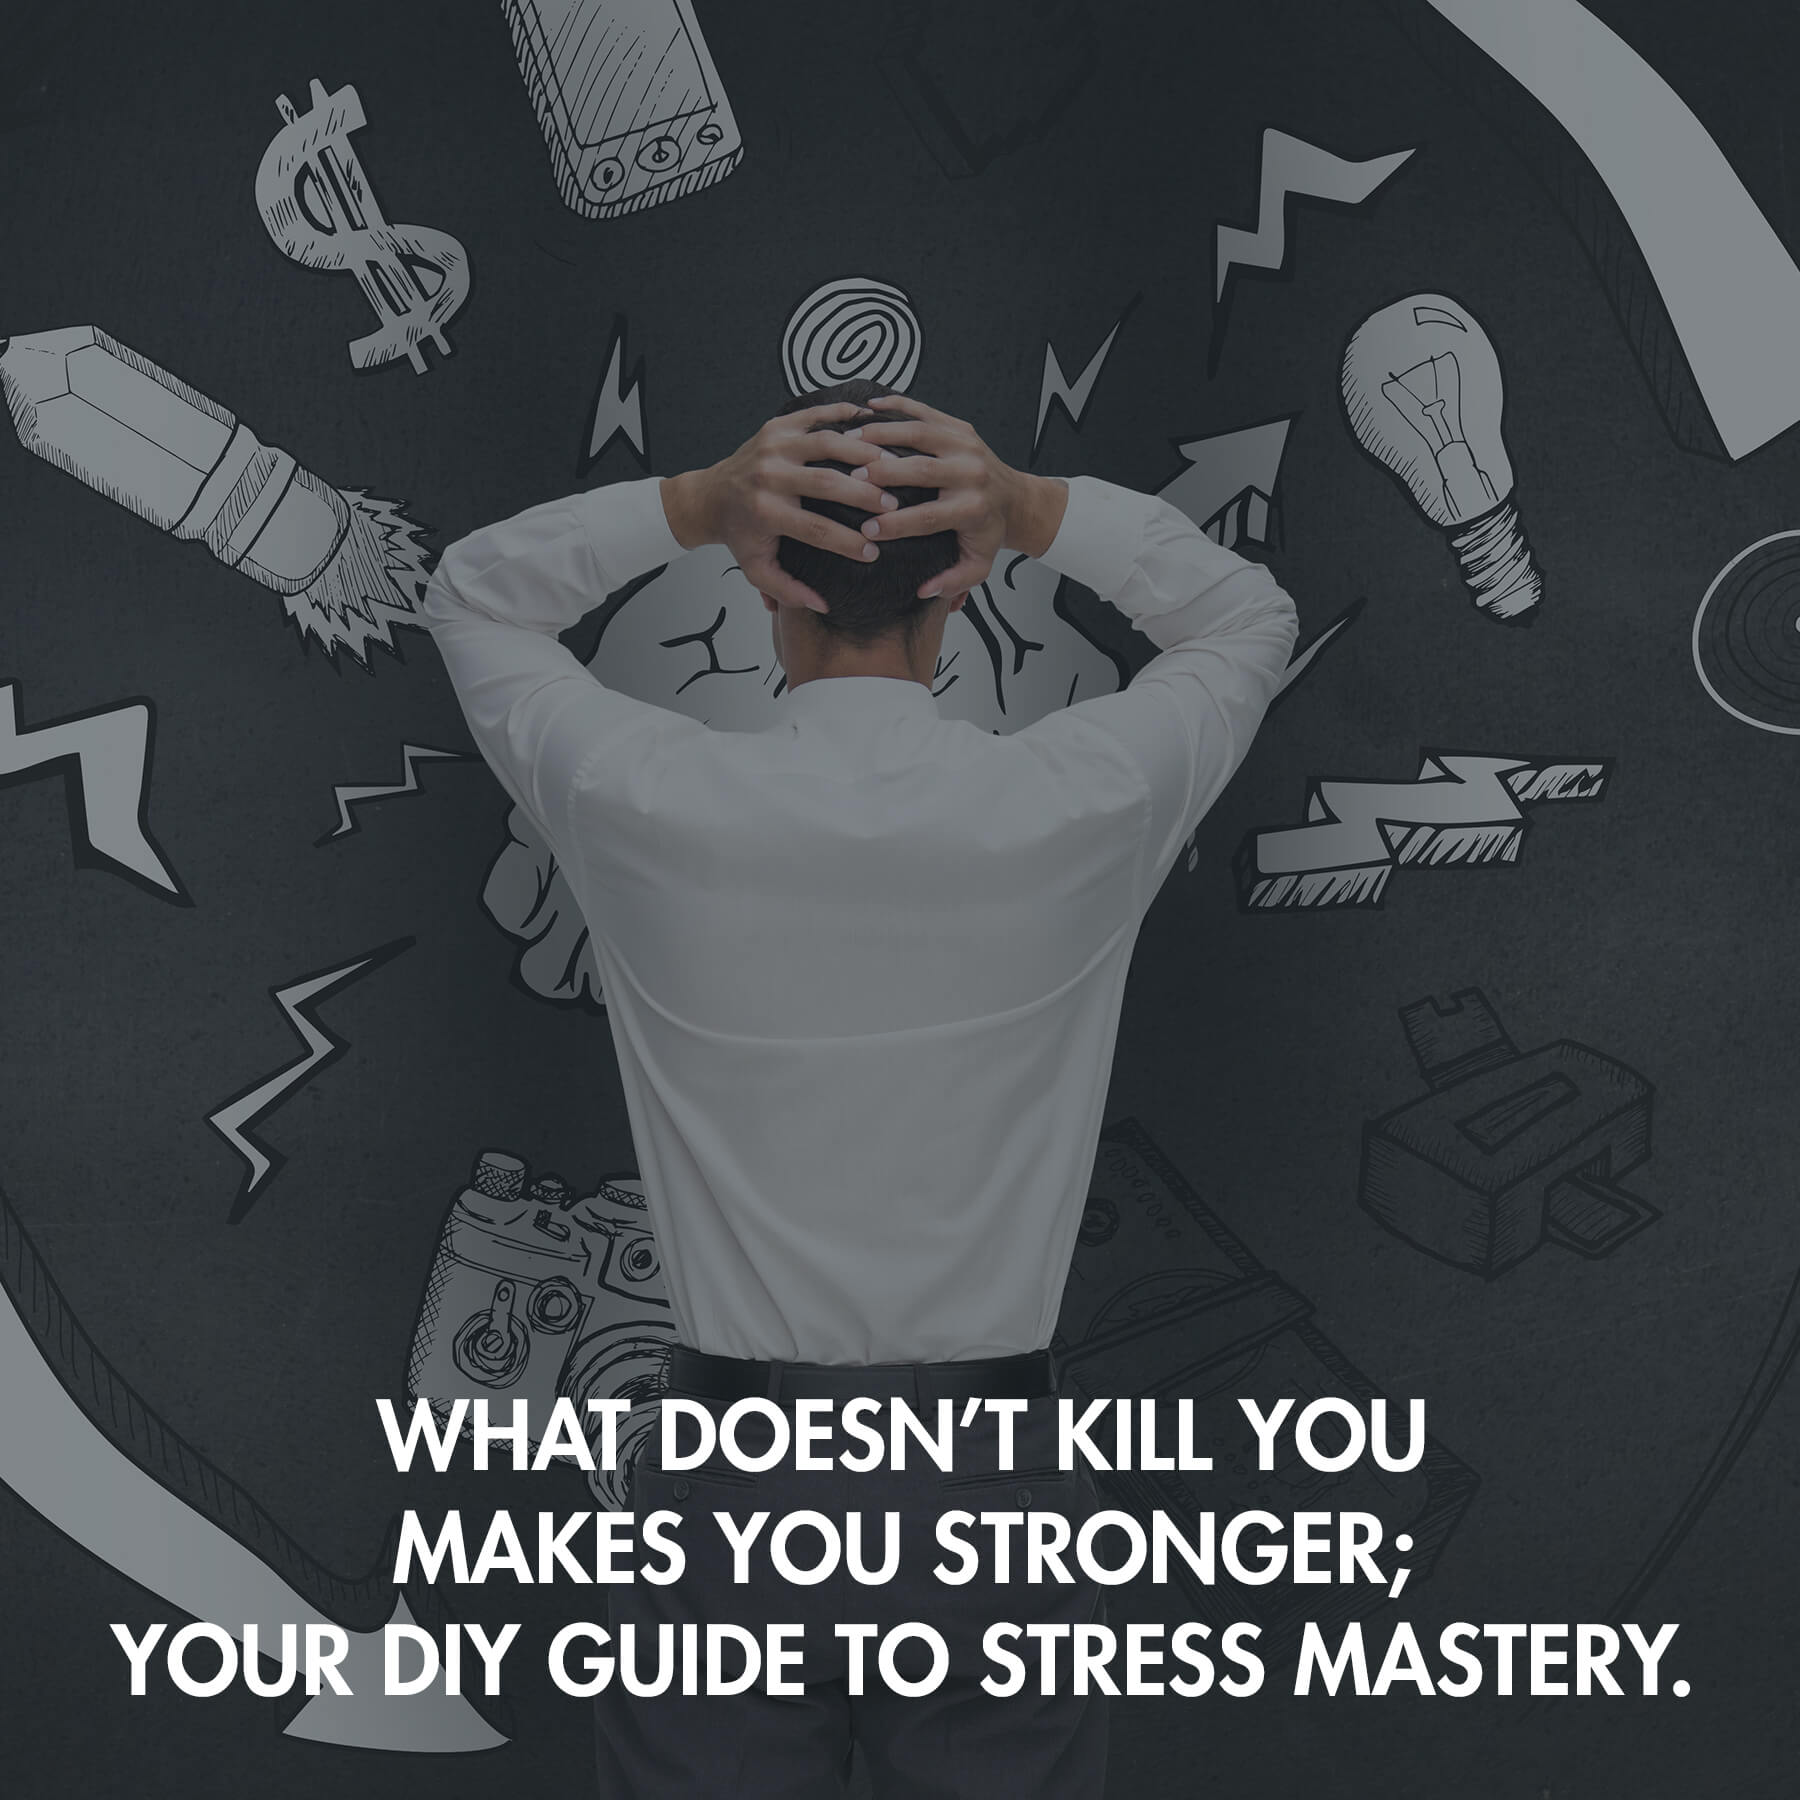 What doesn’t kill you makes you stronger; Your DYI guide to stress mastery.